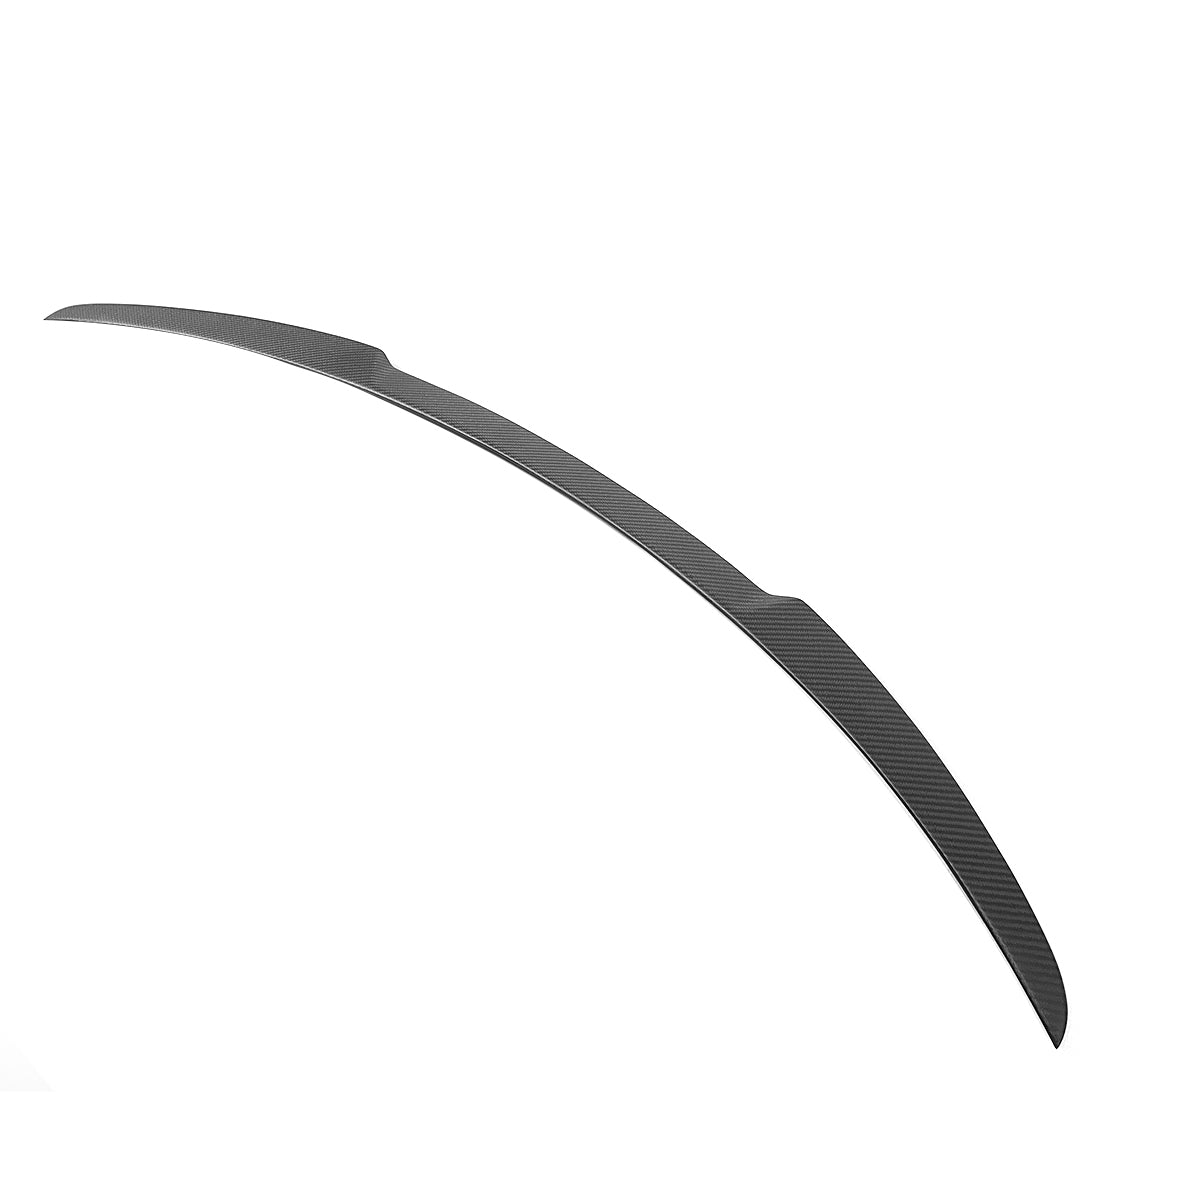 Model Y Spoiler Sport Style - Real Molded Carbon Fiber - Tesery Official Store